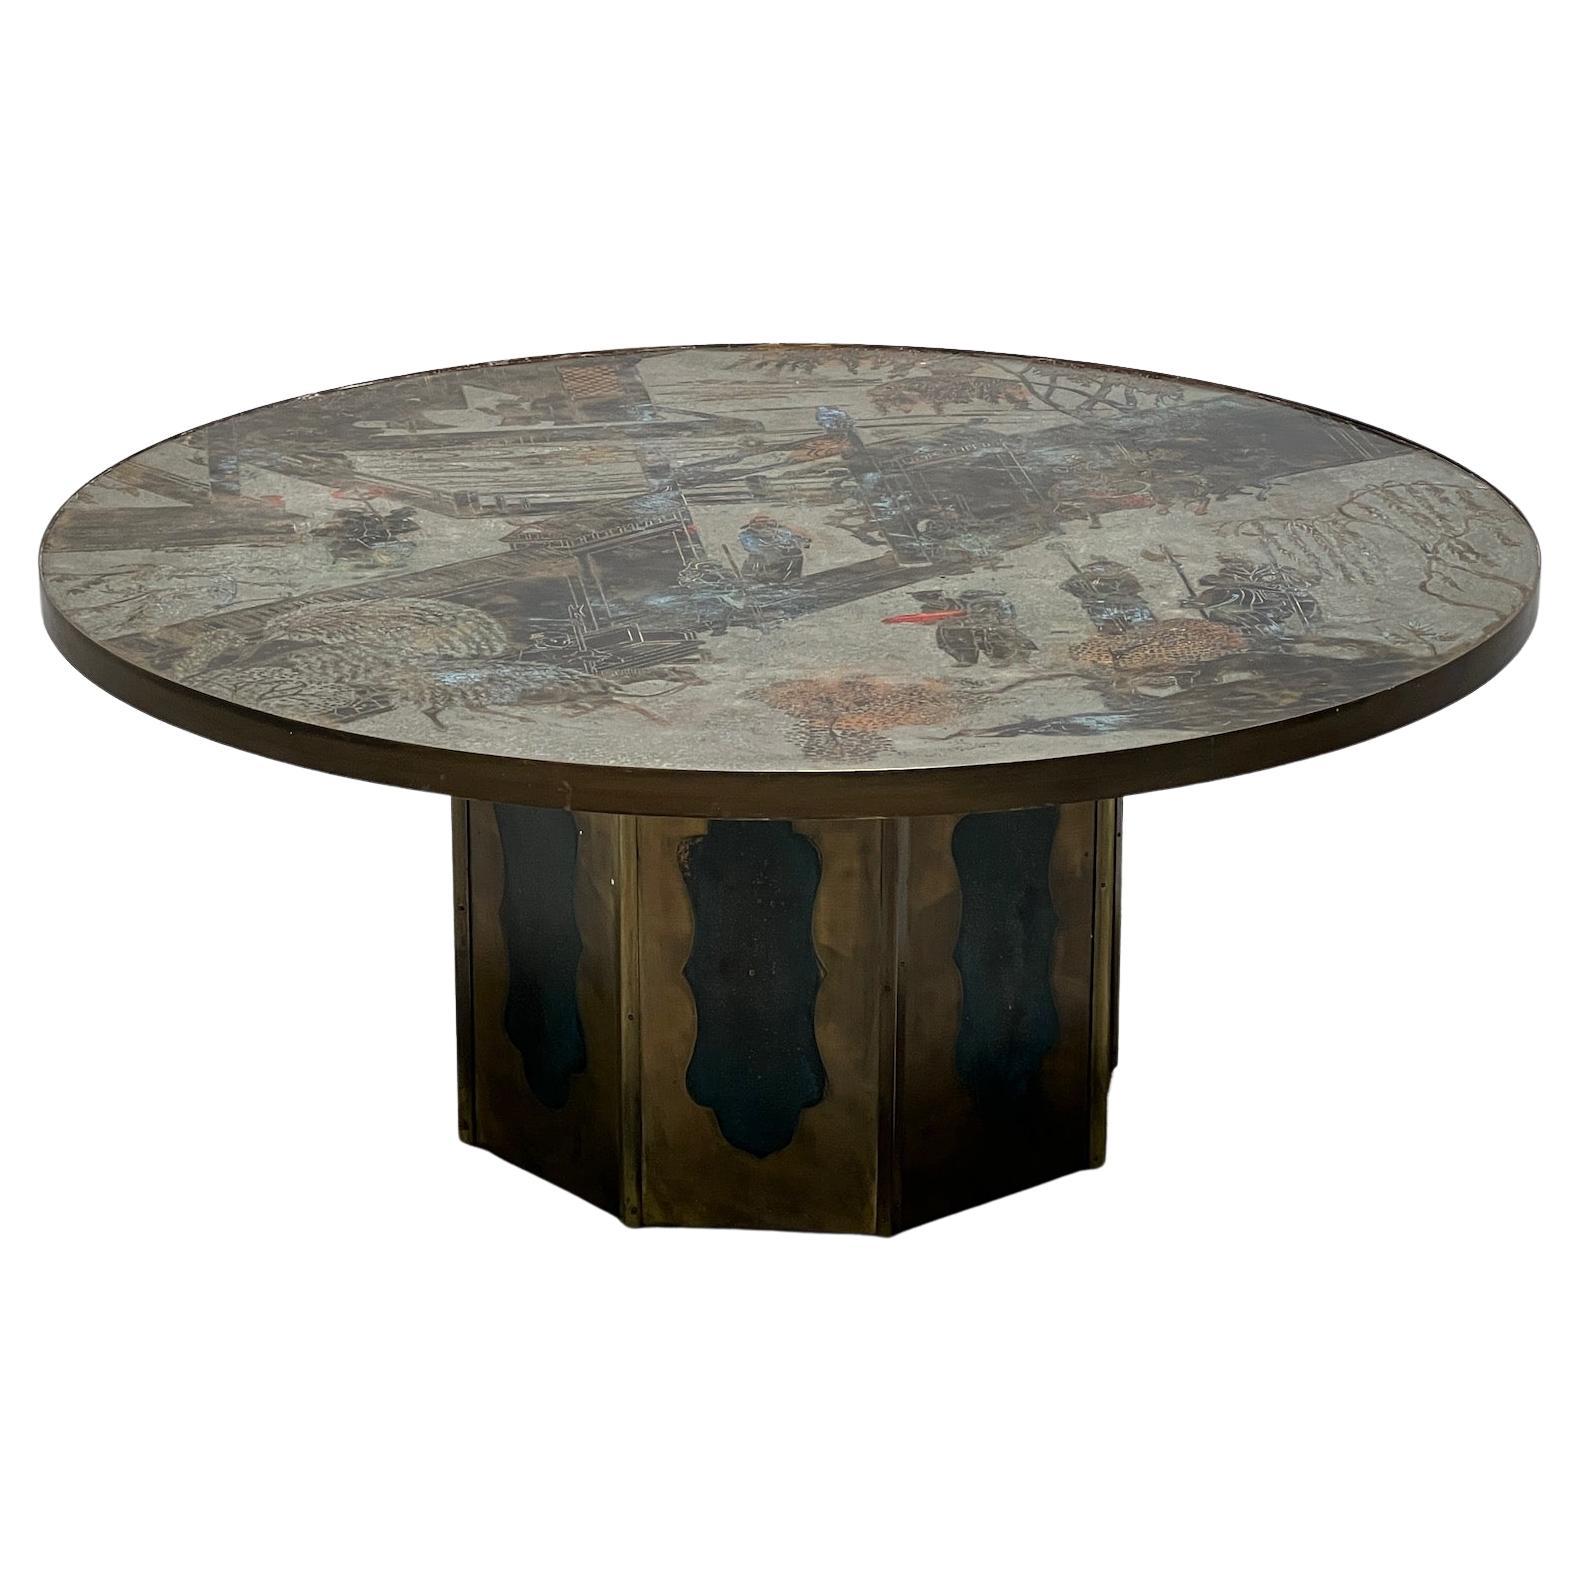 Philip and Kelvin Laverne "Chan" Coffee Table